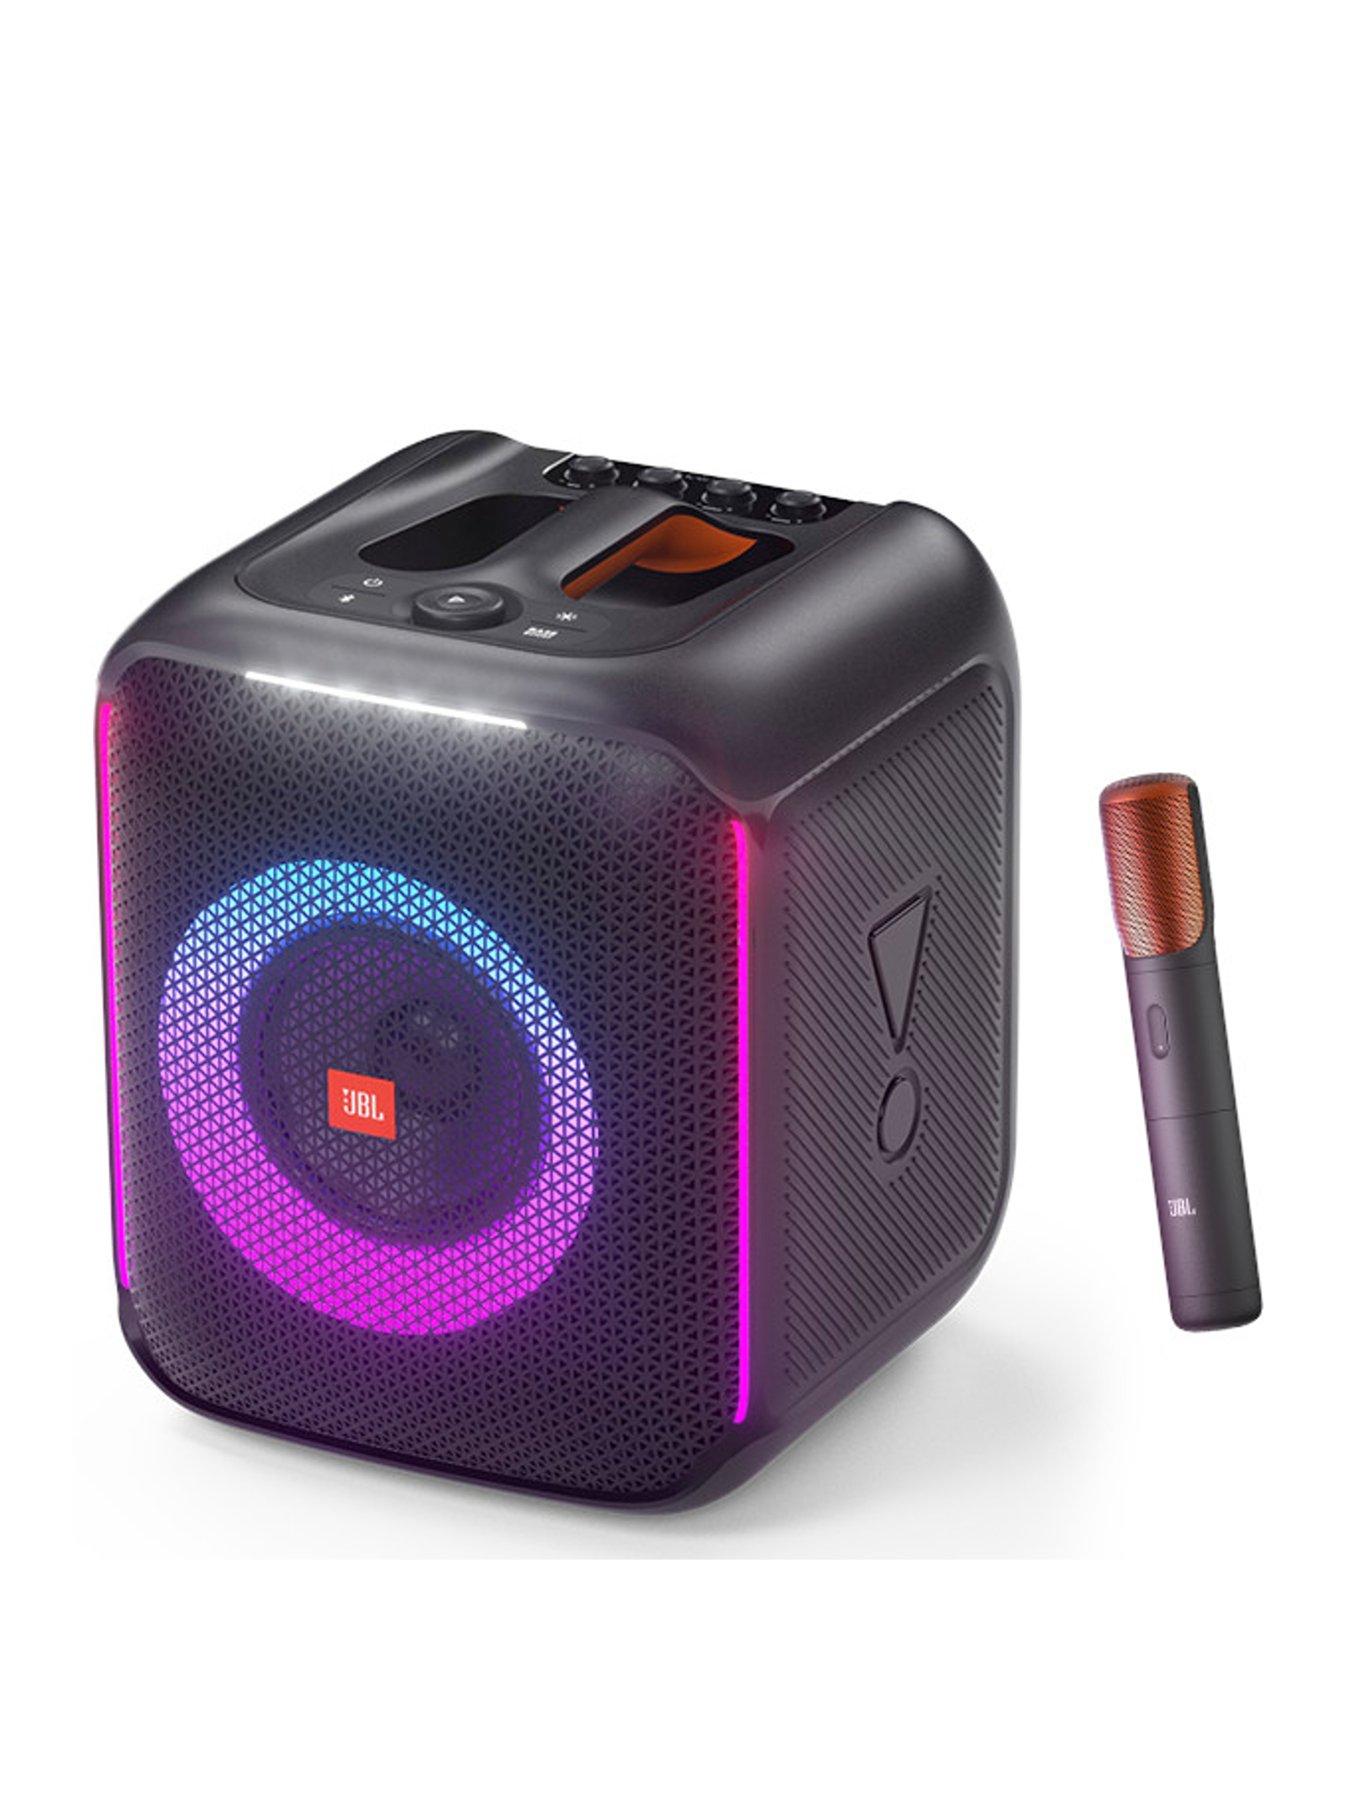 JBL PartyBox 710: An 800W speaker that's user friendly and sounds